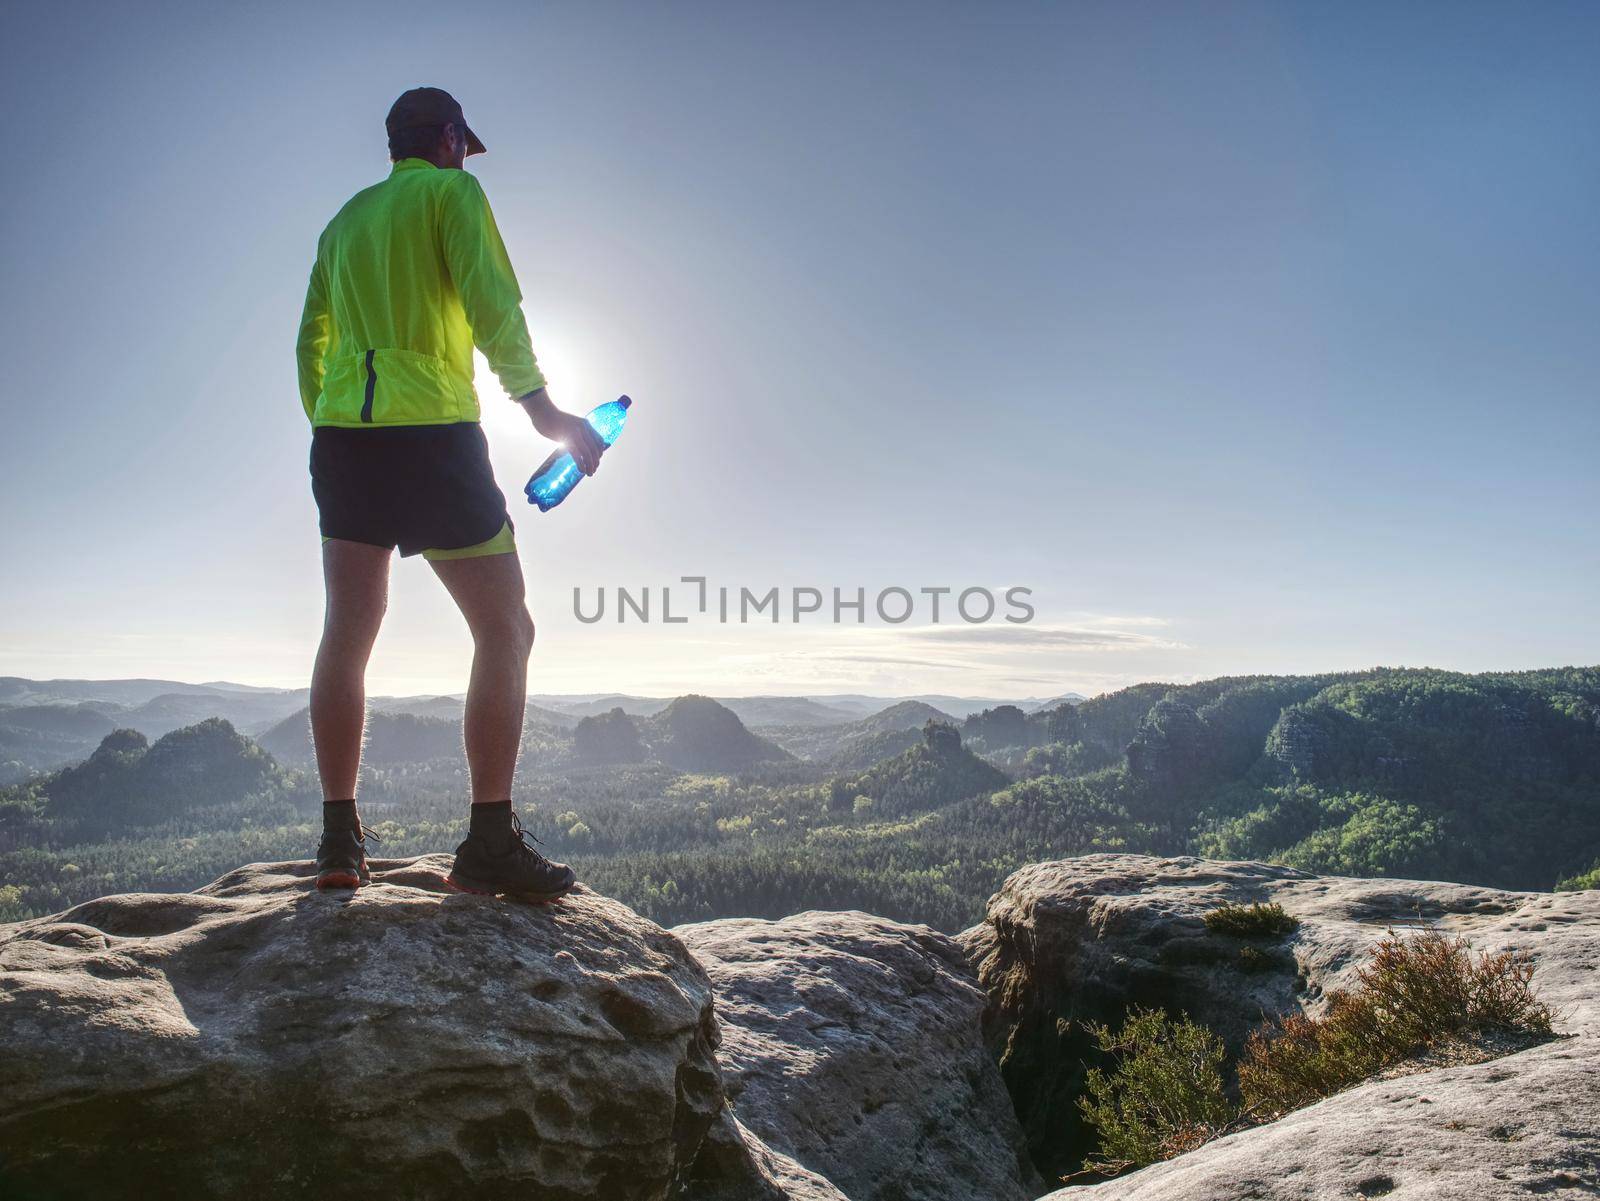 Runner in yellow green shinning jacket and black shorts  jumping on rock. Man athlete while jumping during a trail runnin